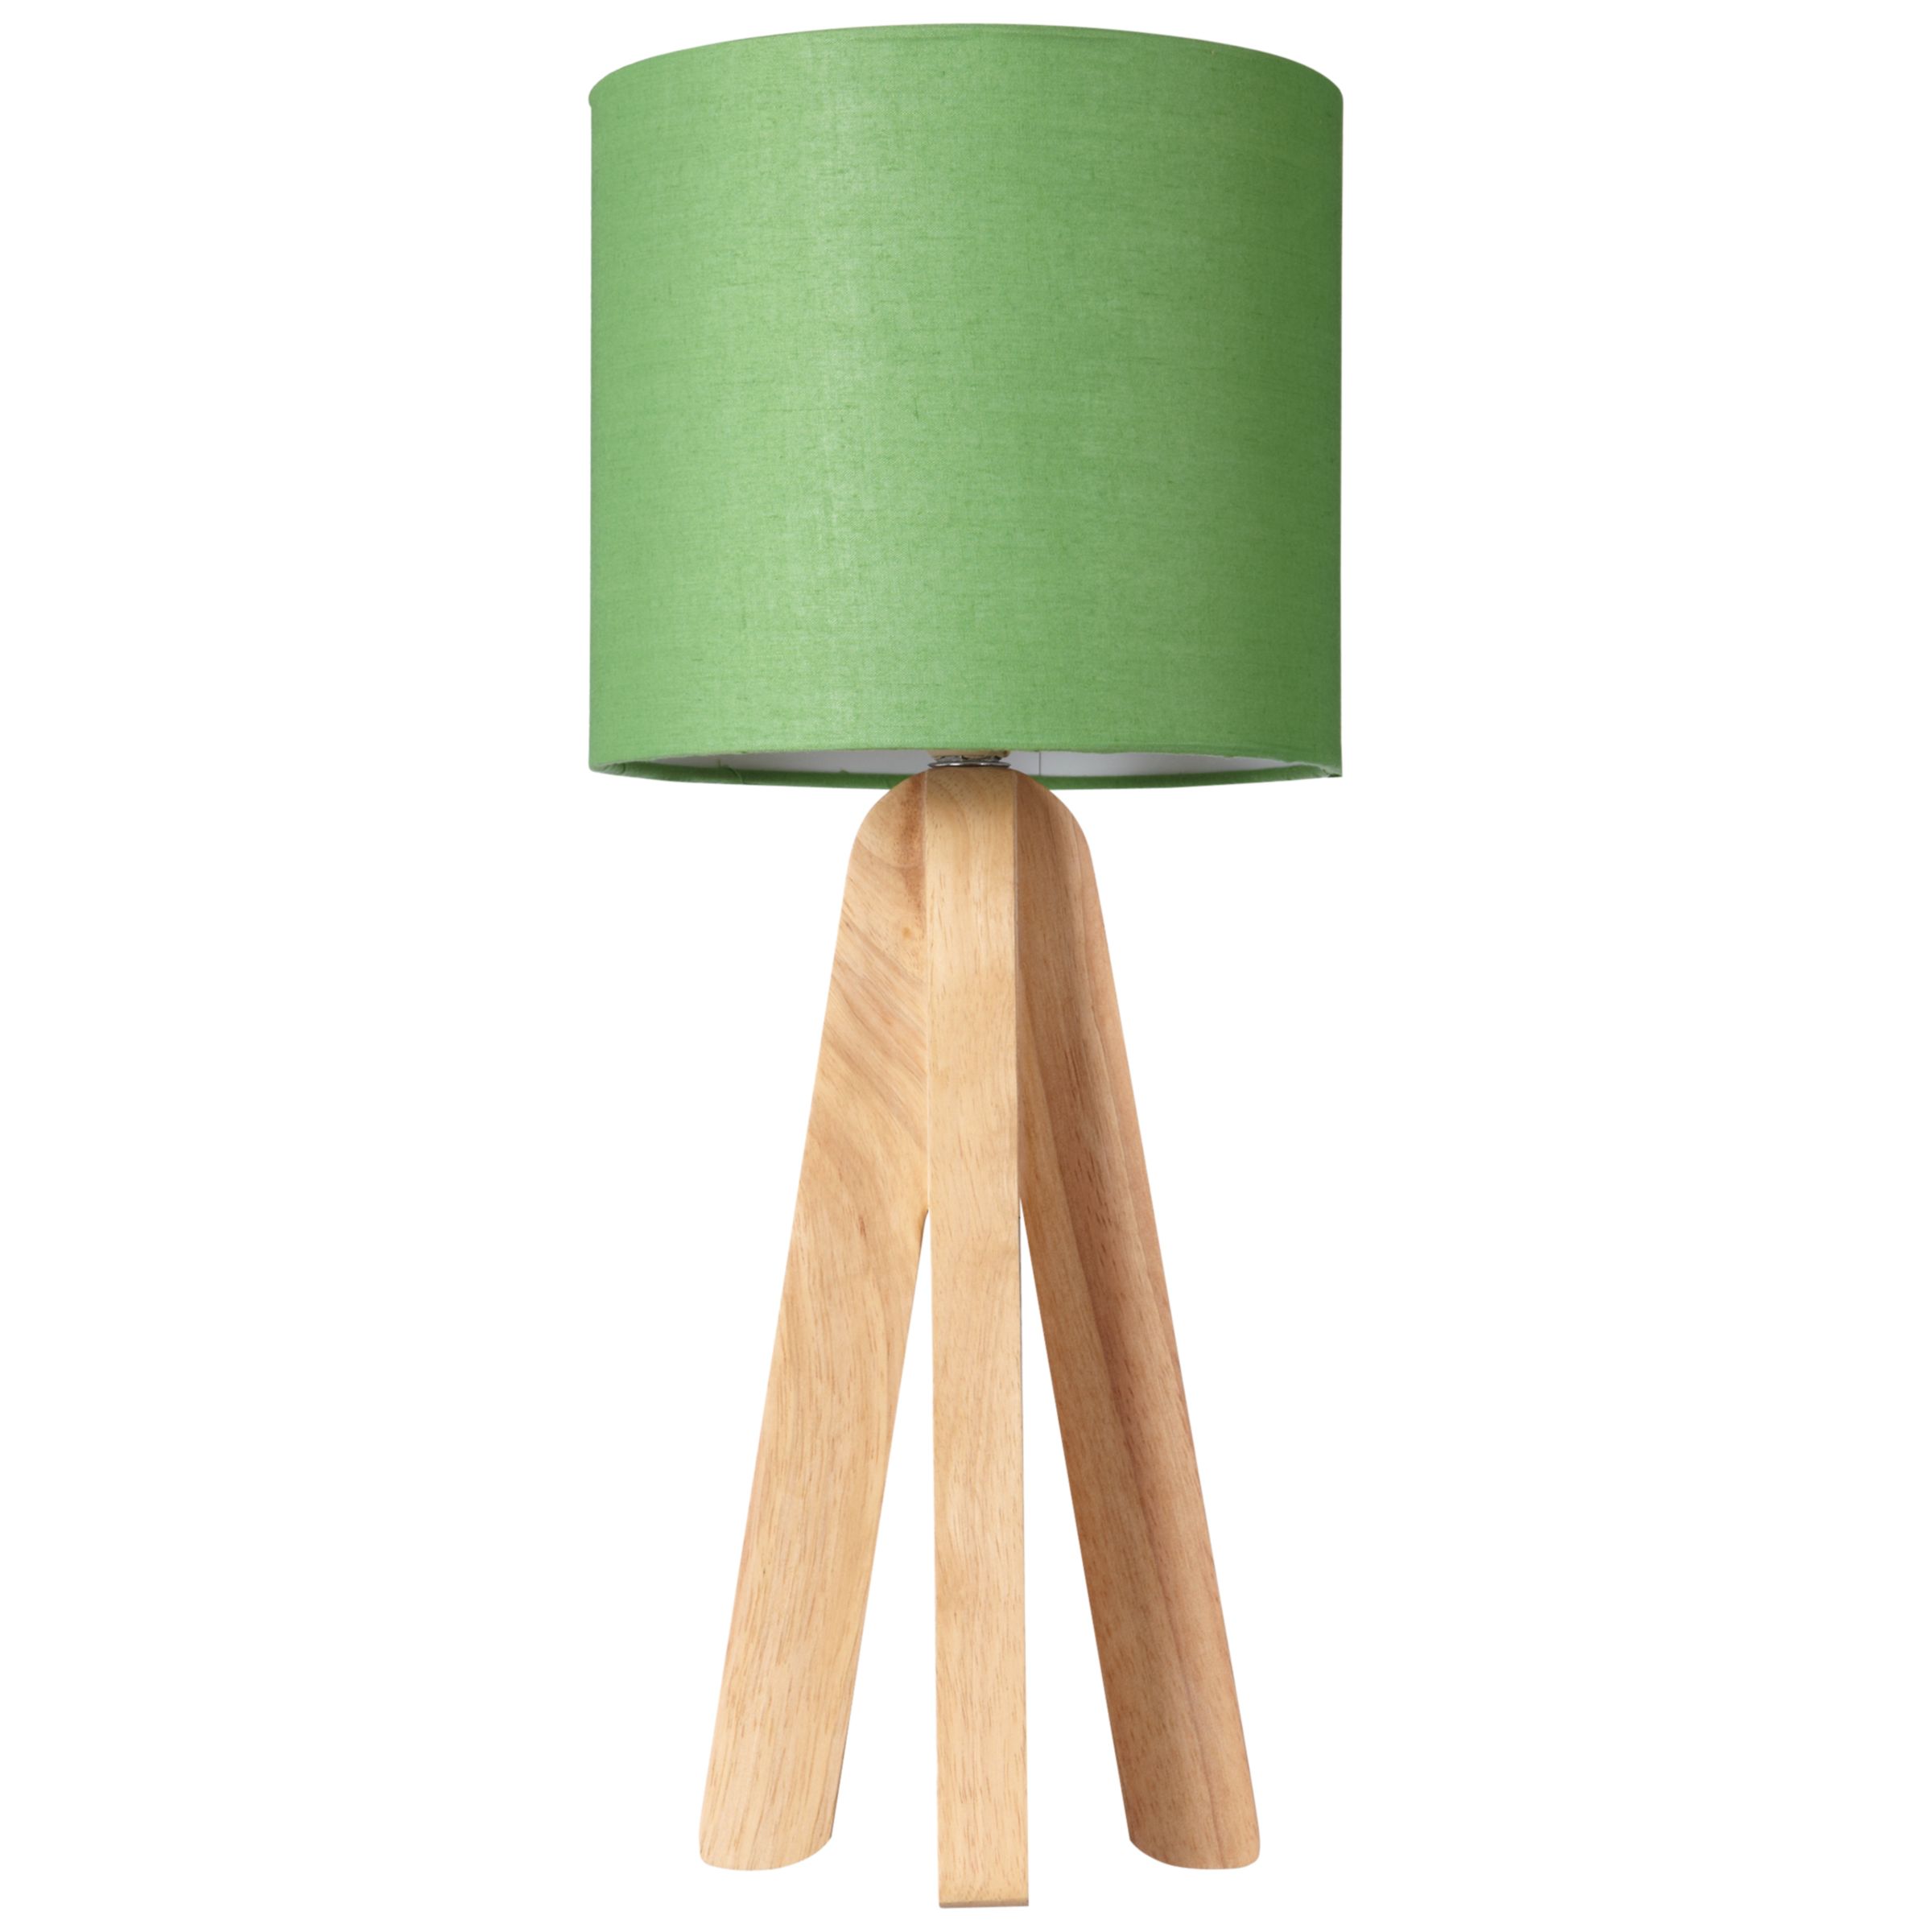 Kylie Table Lamp, Green